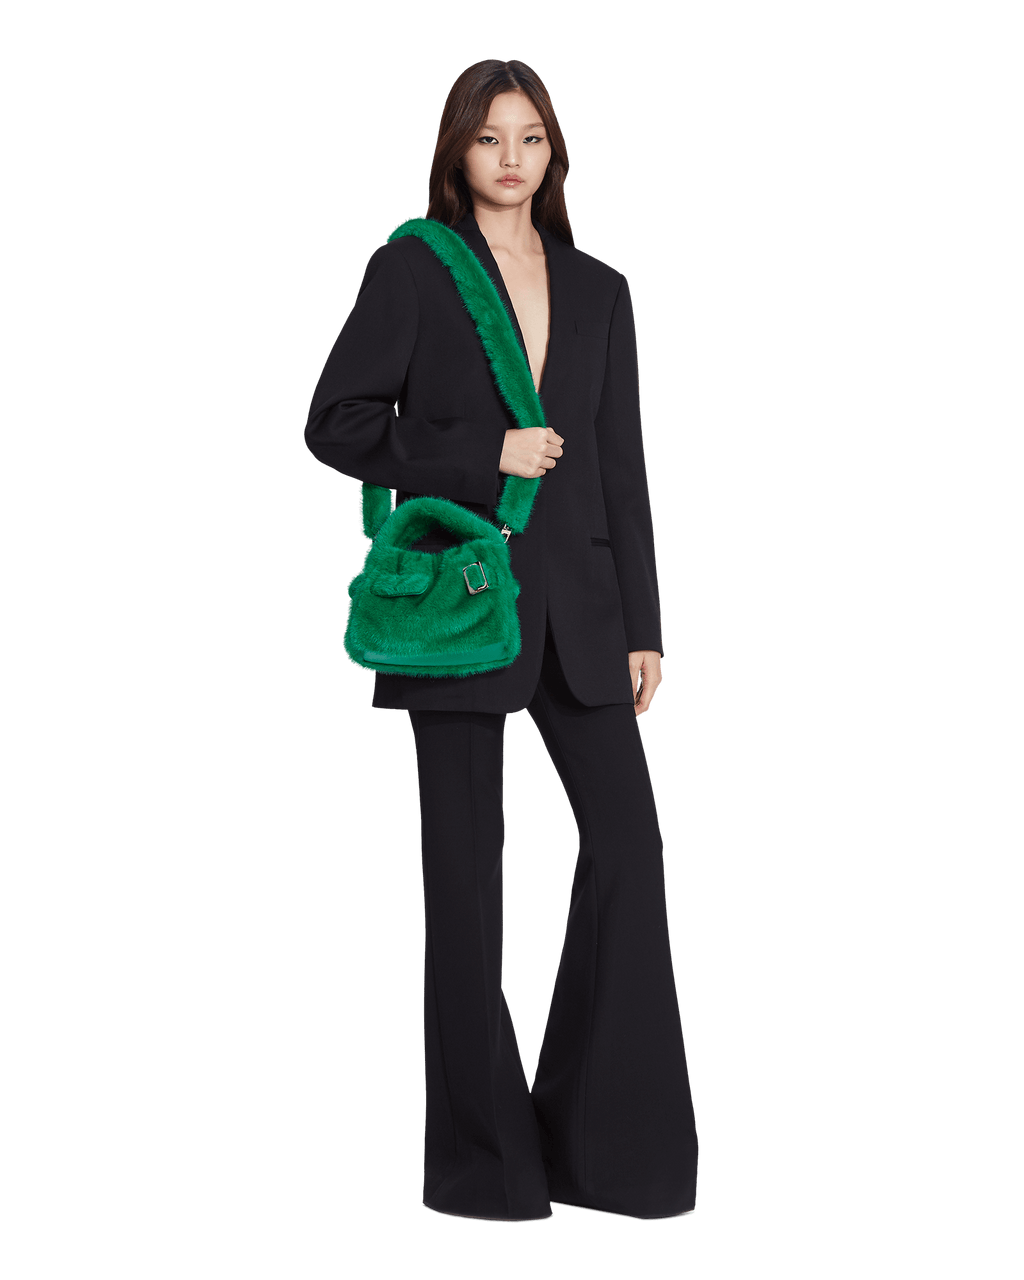 Rectangular green minky pouch with a metal buckle and, a belt, and a shoulder strap.